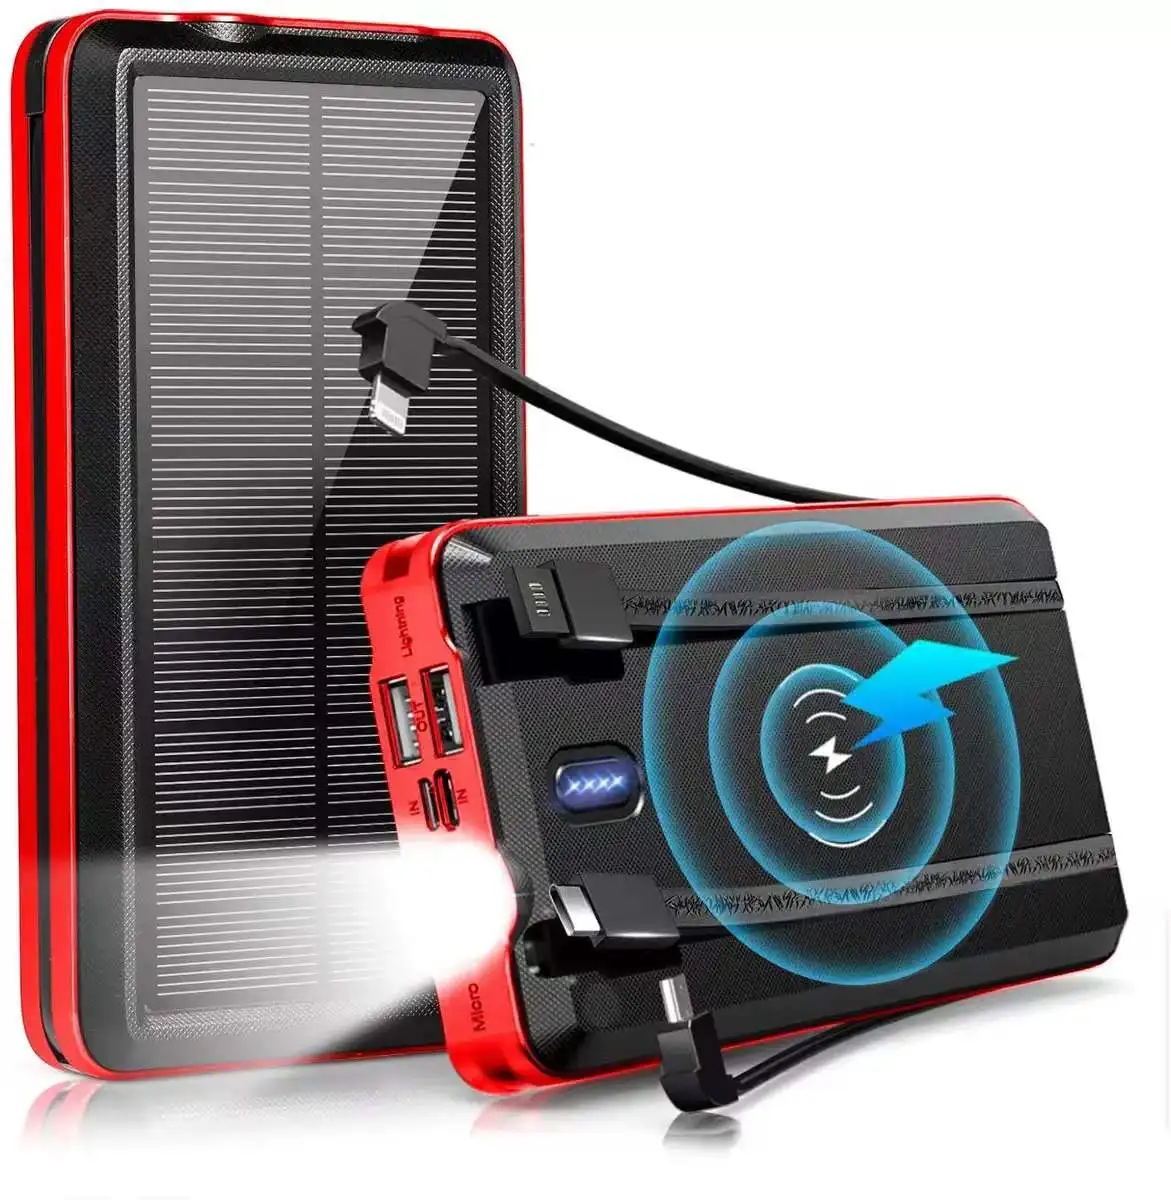 power bank Solar Power Bank 99000mAh Qi Wireless Charger Powerbank for iPhone 12 Samsung S21 Xiaomi Powerbank with 4 Cables LED Flashlight top power bank Power Bank